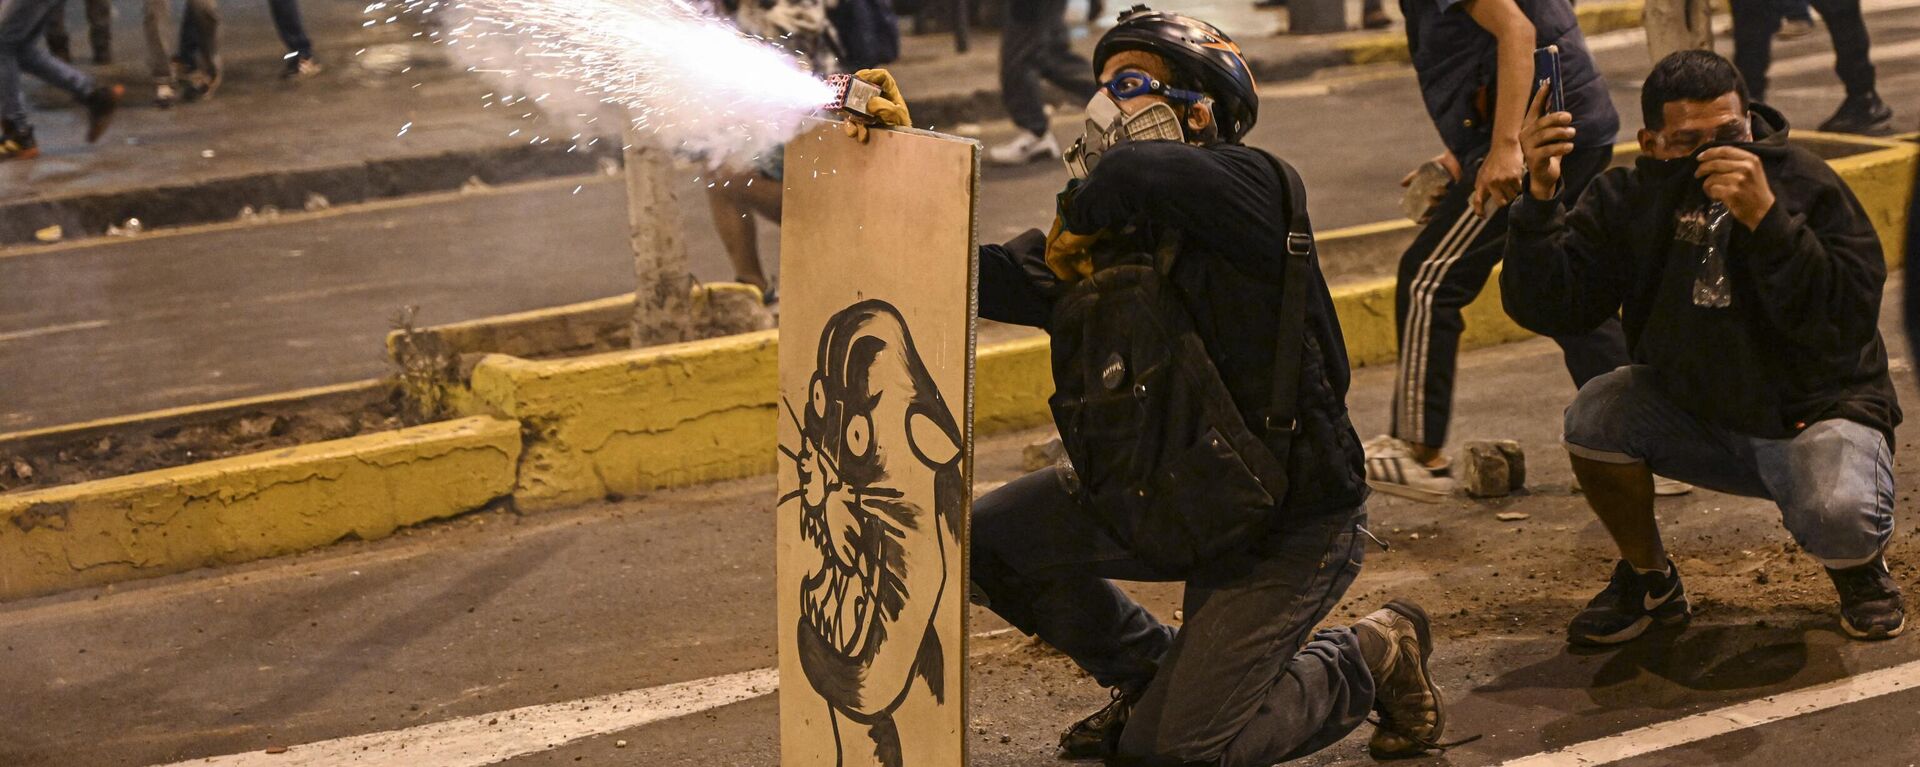 Supporters of former President Pedro Castillo launch firecrackers at riot police during a protest near the Congress in Lima on December 12, 2022 - Sputnik International, 1920, 18.12.2022